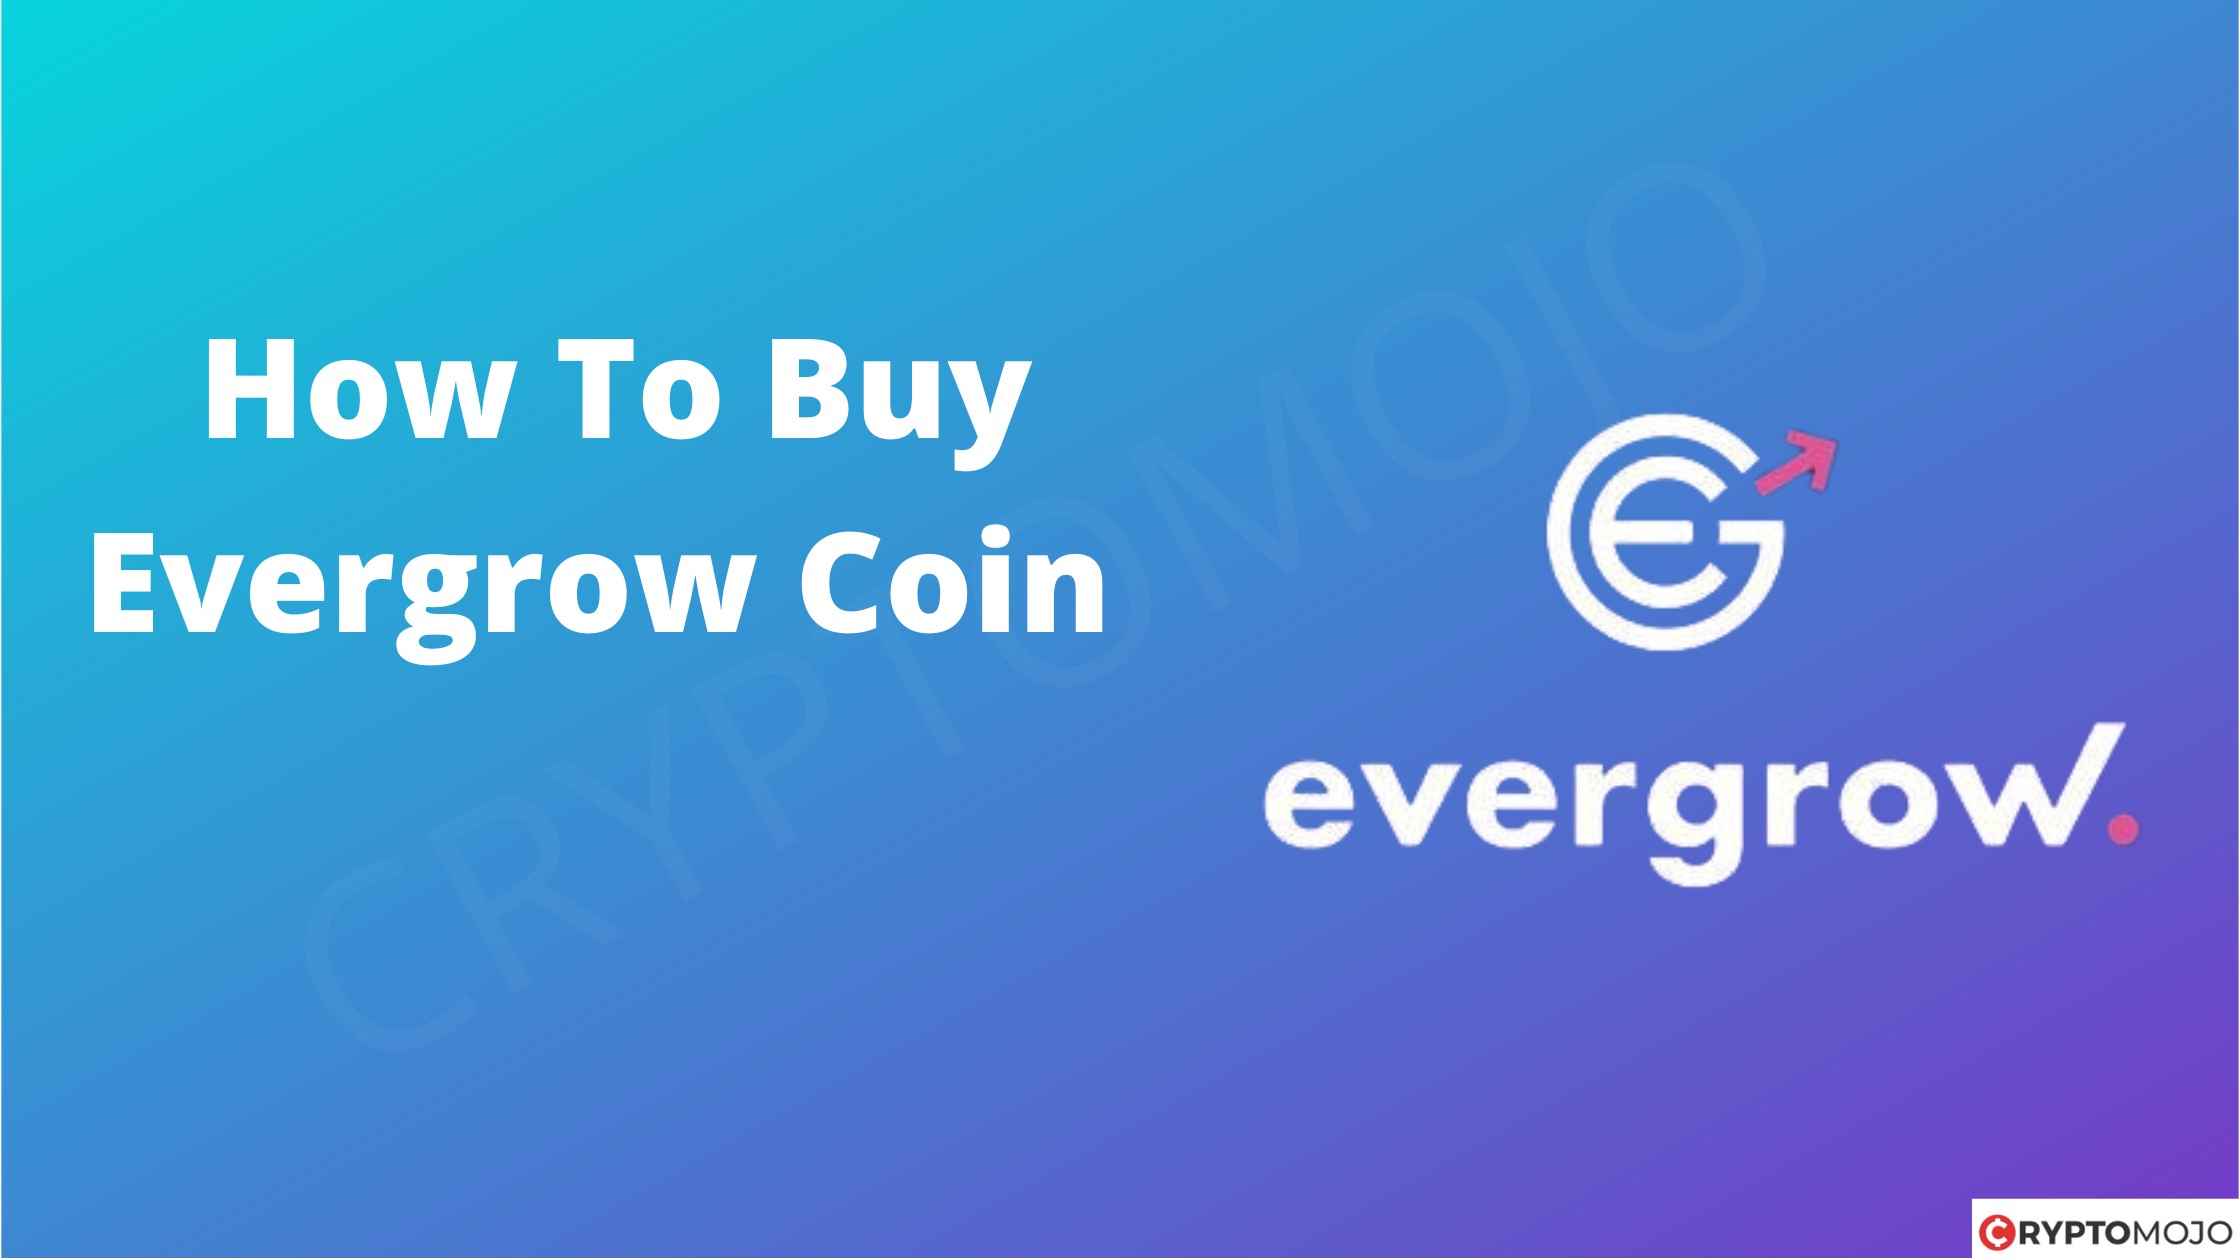 How To Buy Evergrow Coin